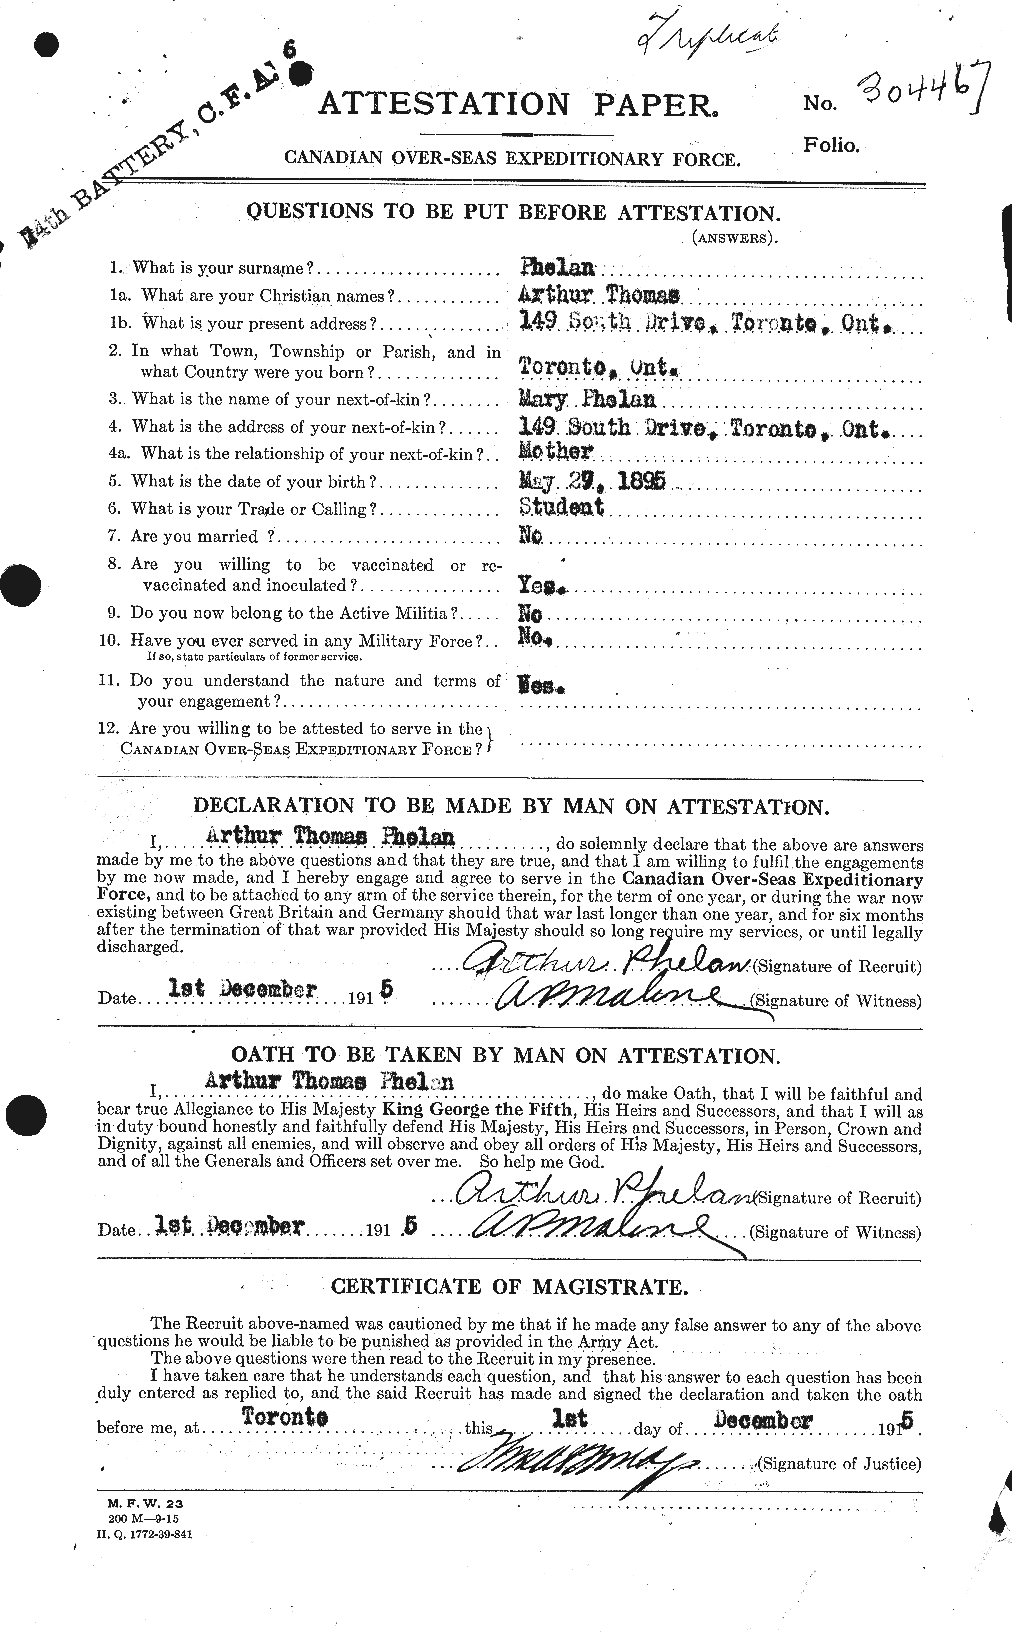 Personnel Records of the First World War - CEF 576938a